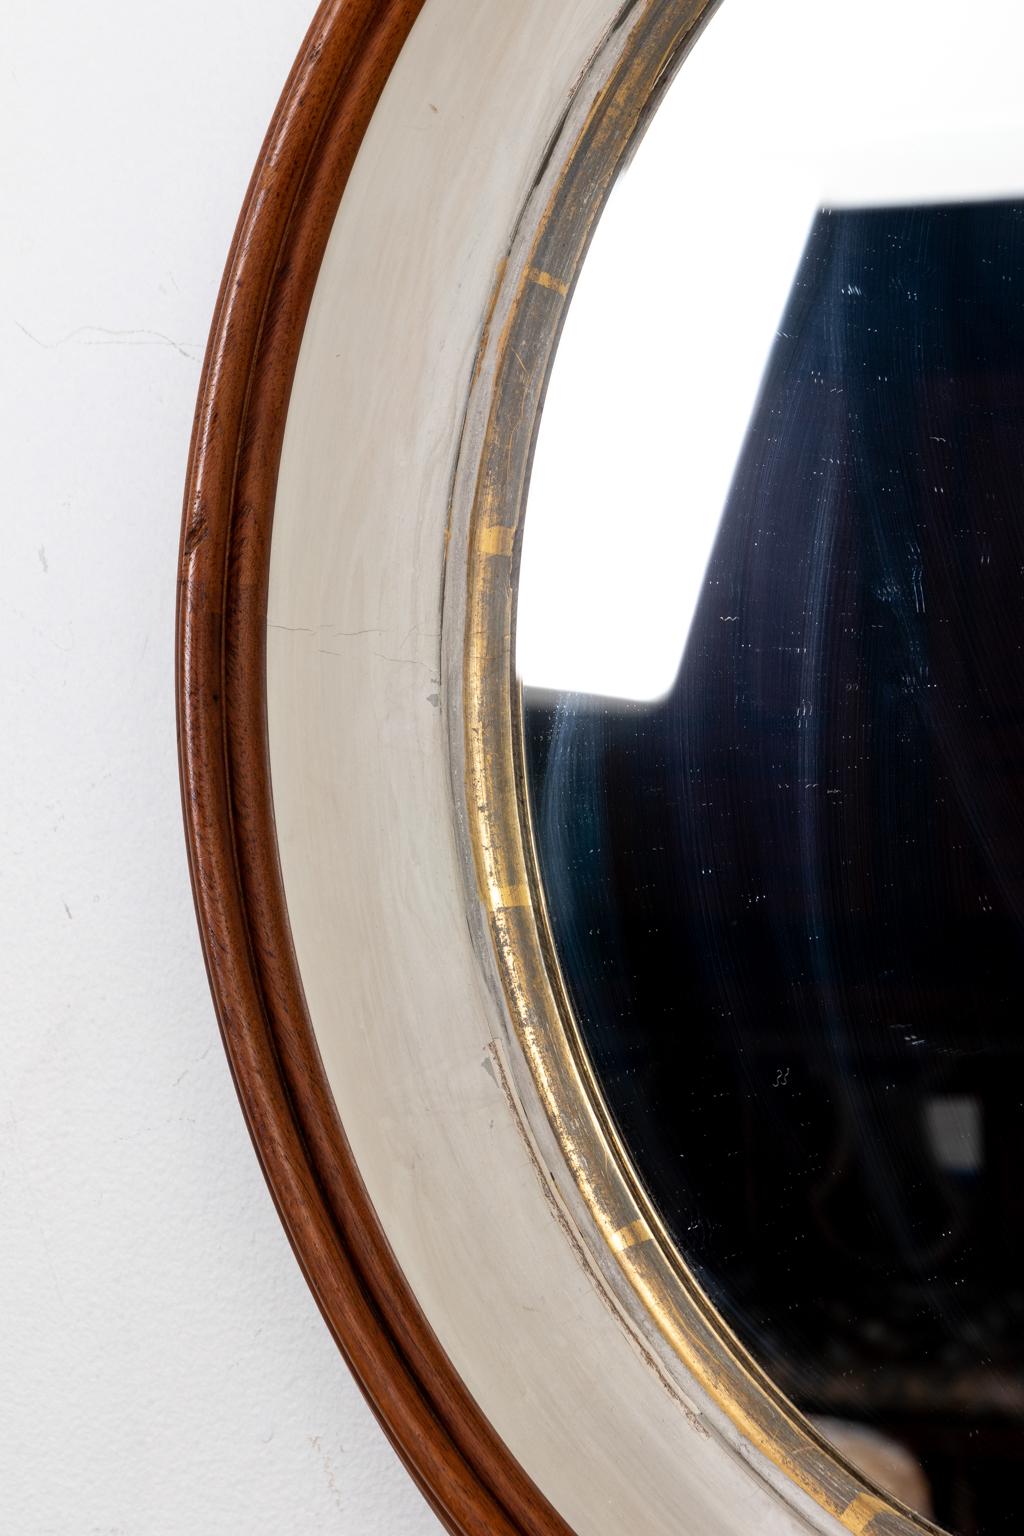 Circa 1920s pair of antique deep set oval mirrors featuring wood in a stained, painted, and gilt finish. Made in the United States. Please note of wear consistent with age.